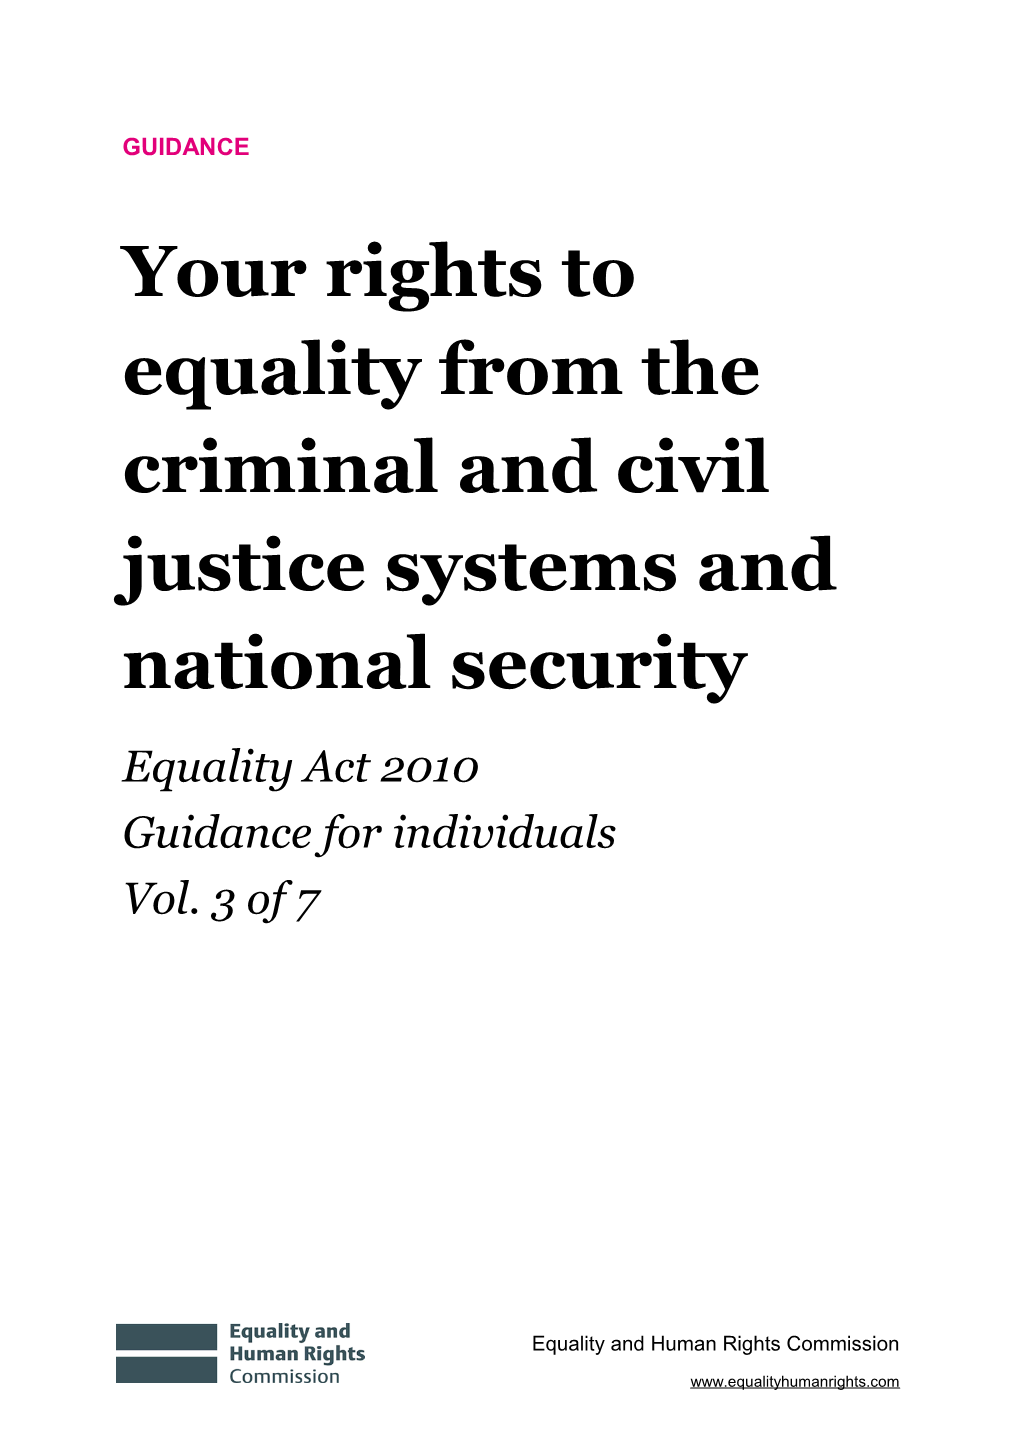 Your Rights to Equality from the Criminal and Civil Justice Systems and National Security